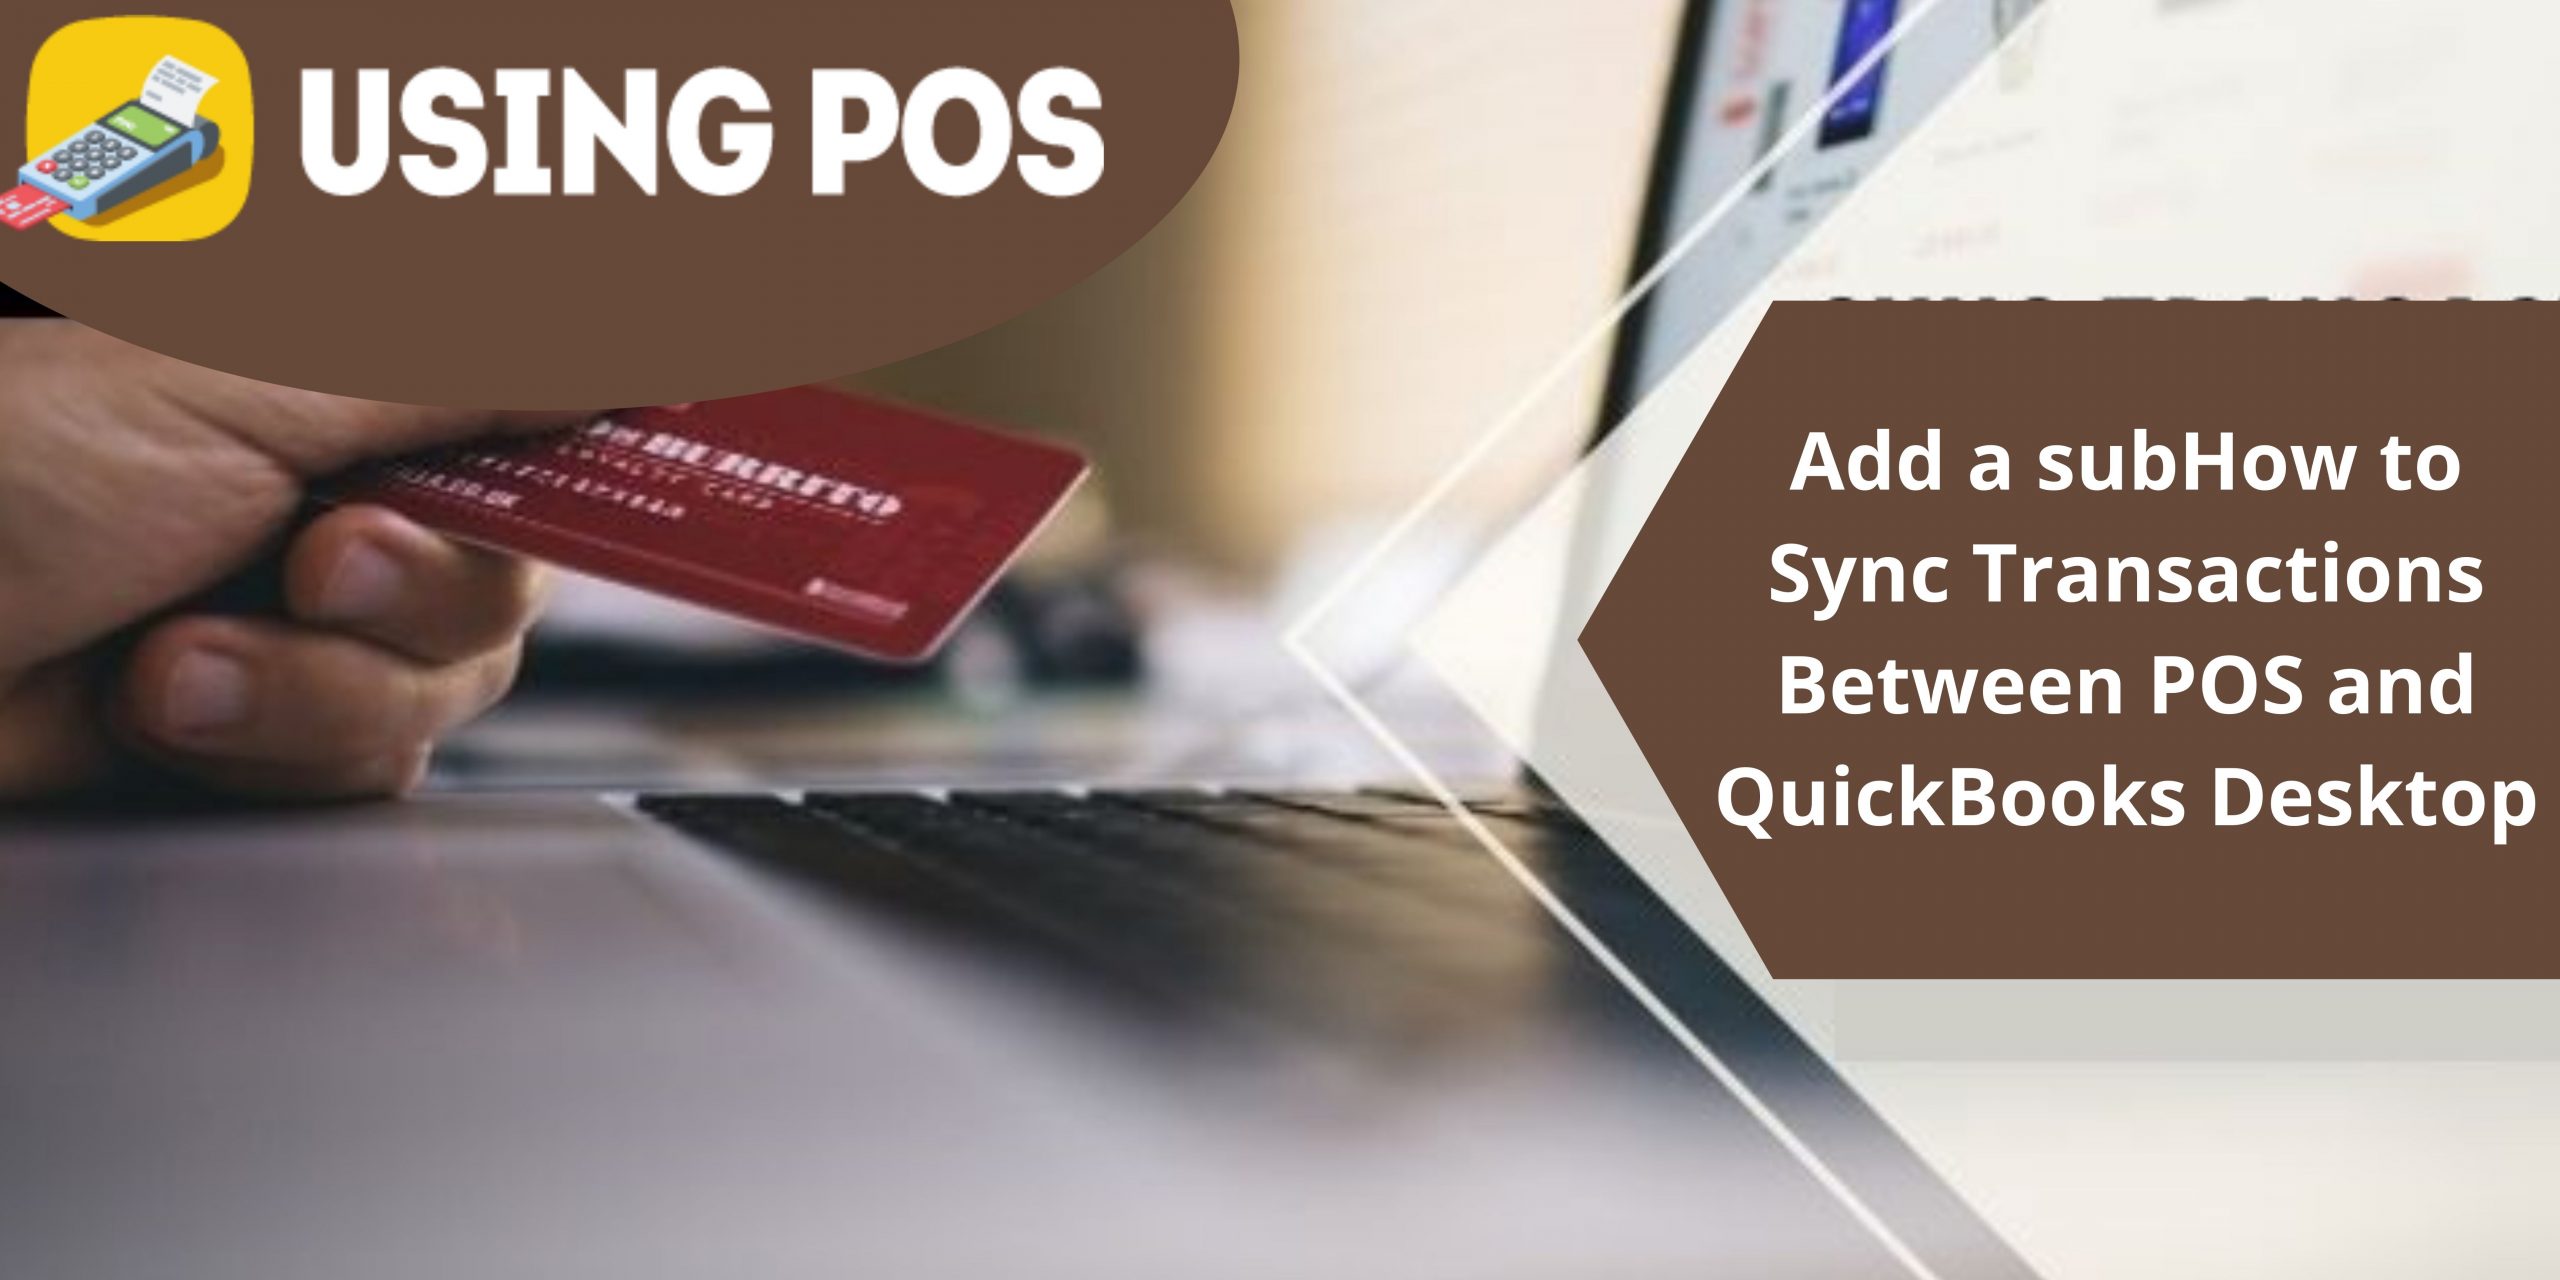 How to Sync Transactions Between POS and QuickBooks Desktop